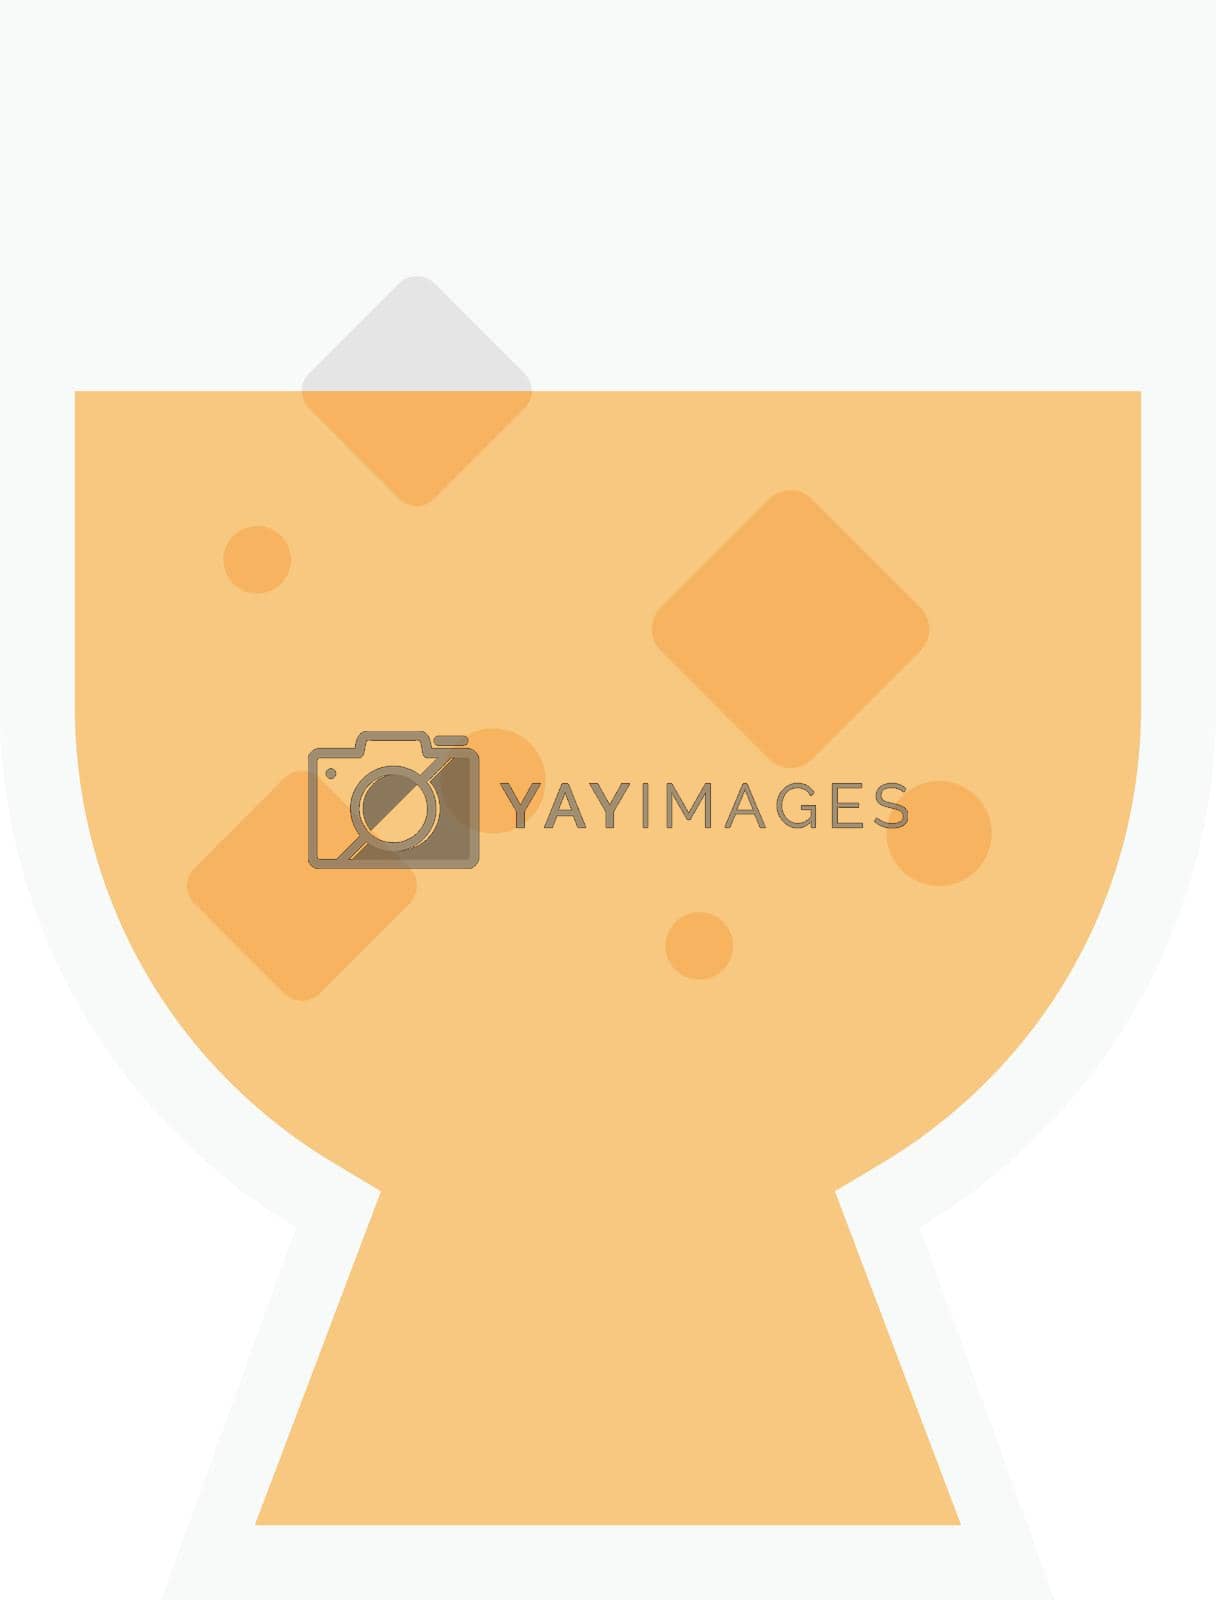 drink vector flat colour icon